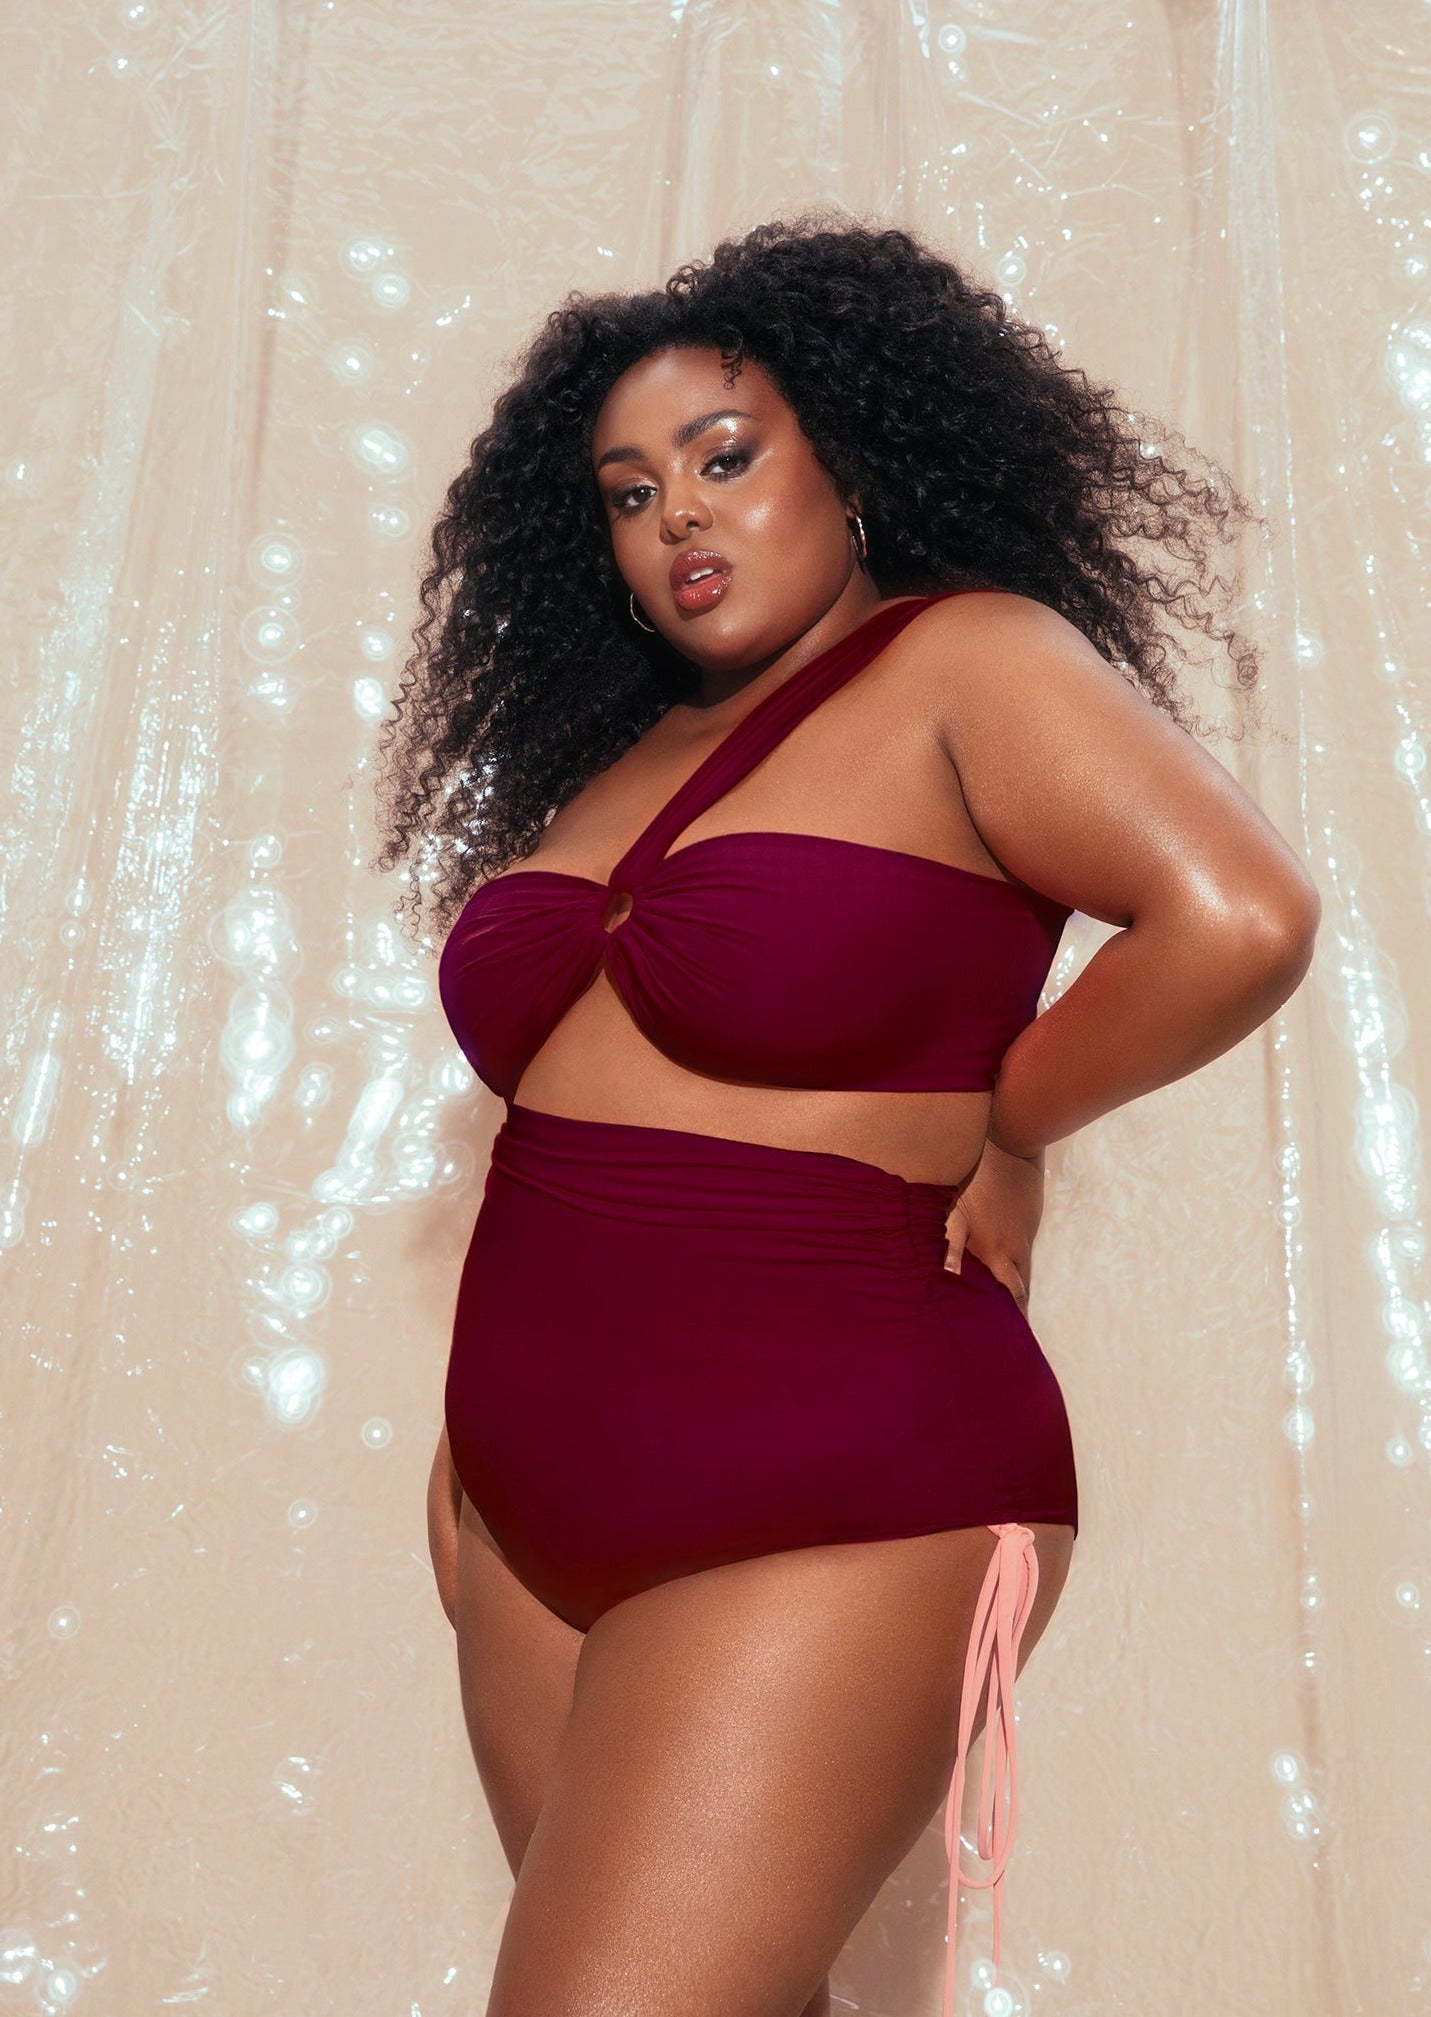 If You're Still Looking for a Fun Plus Size Bathing Suit, Hilary